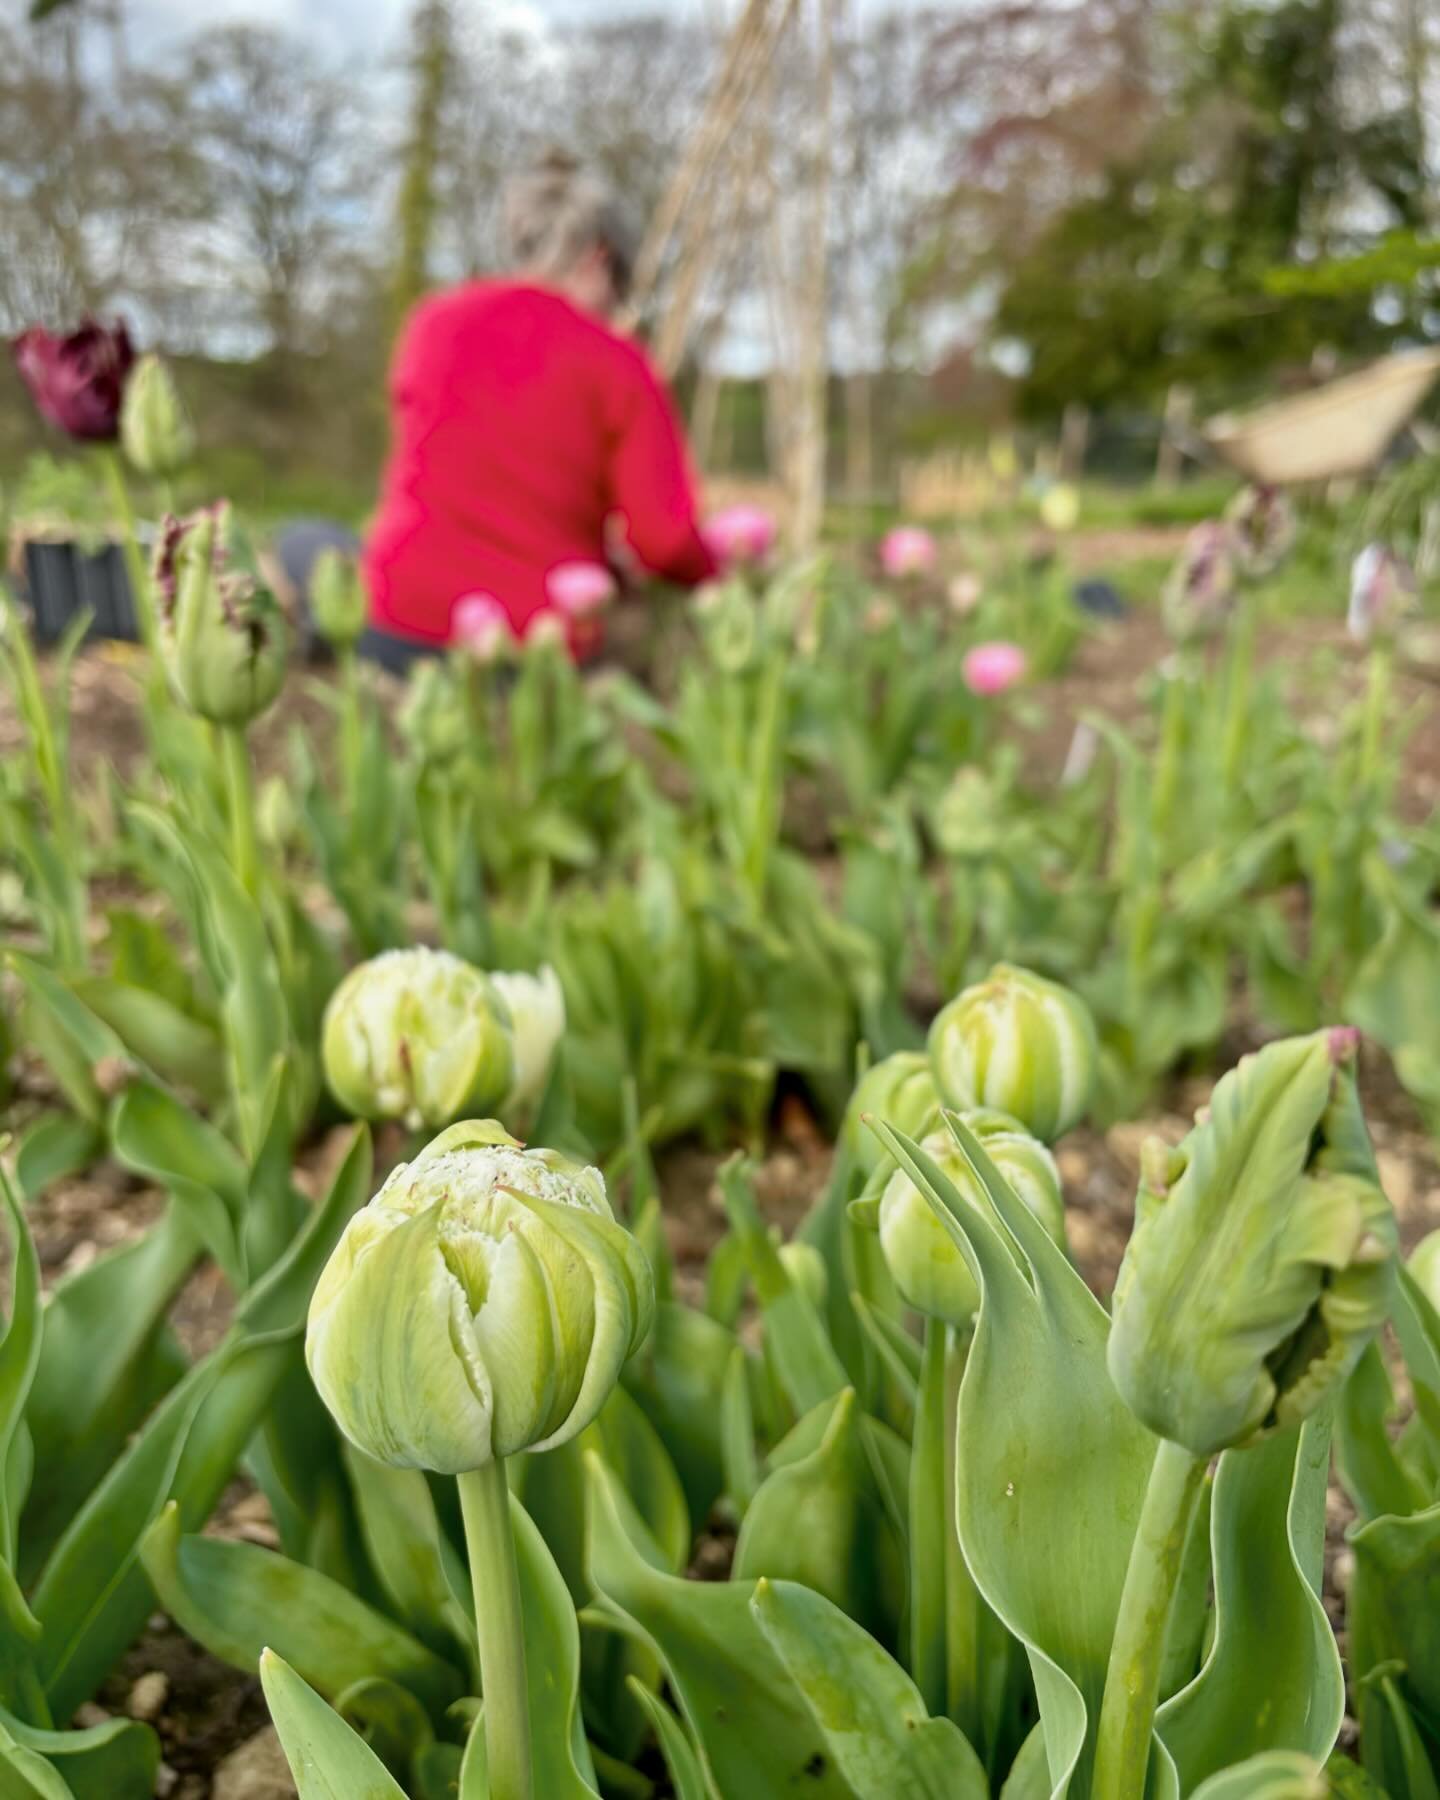 As the tulips come to an end Lorraine has been busy planting out a brilliant variety of sweet pea bred for cut flowers and perfect for weddings. Look forward to some wonderful scent, isn&rsquo;t that the true joy of using British flowers? 

#britishf